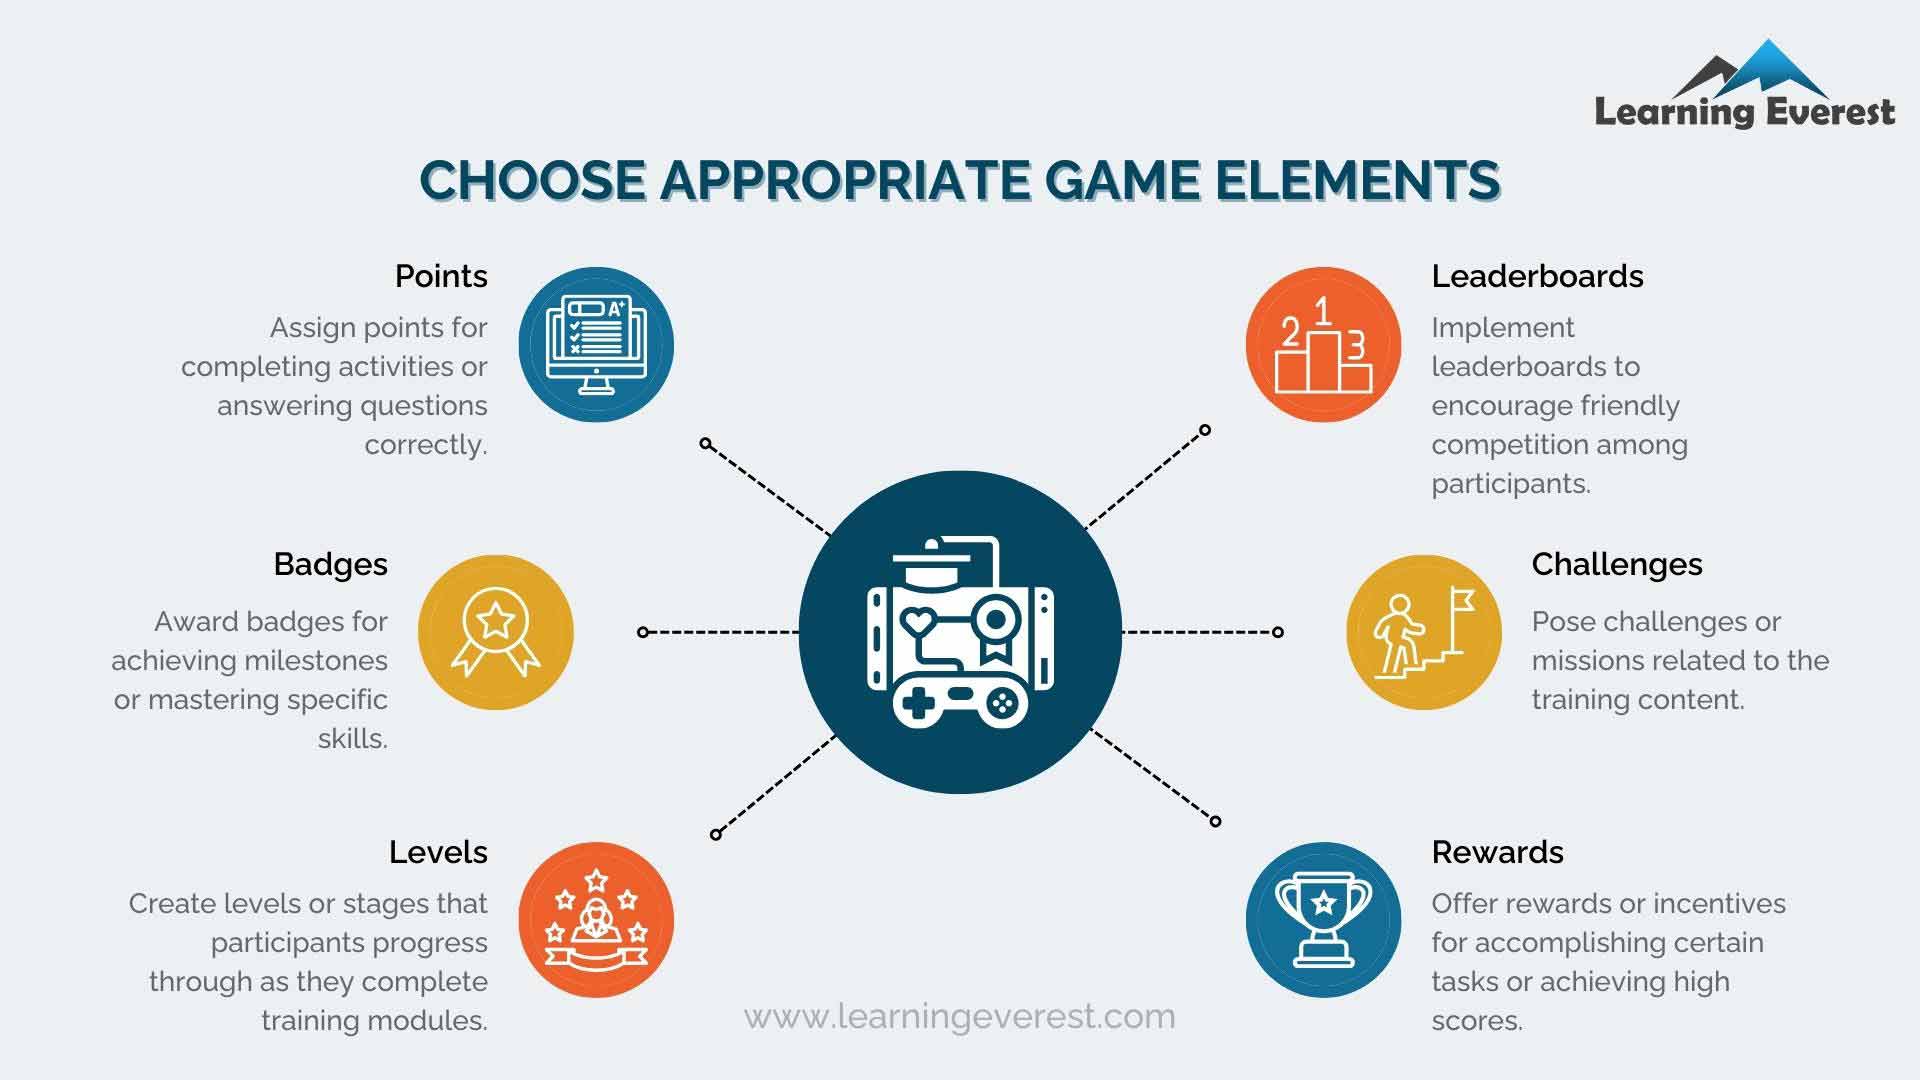 Tips for Interactive Sales and Marketing Training Content - Use gamification